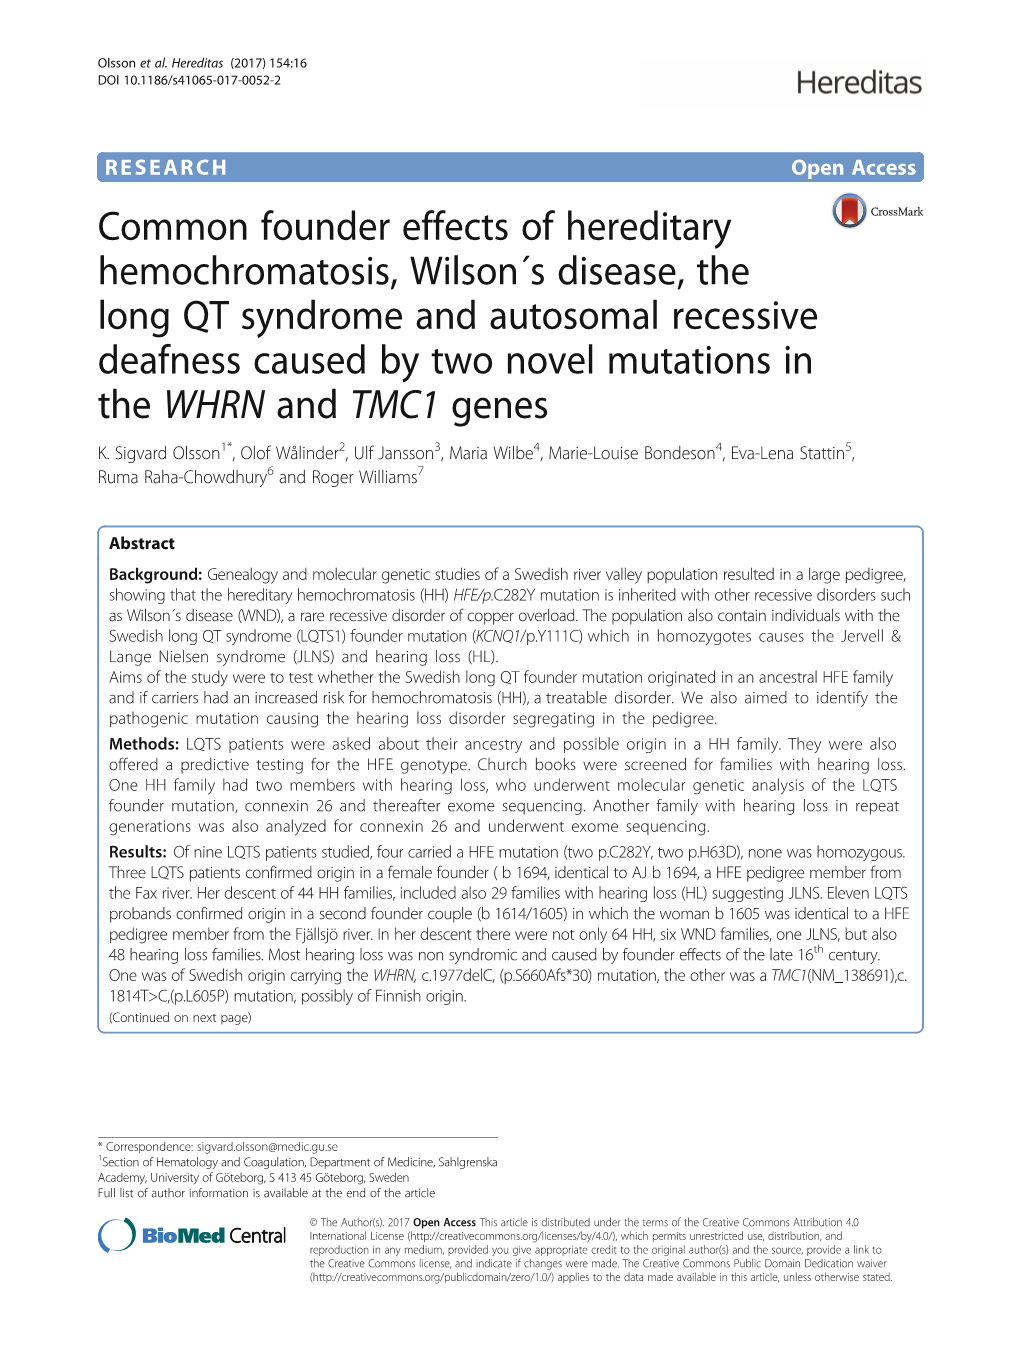 Common Founder Effects of Hereditary Hemochromatosis, Wilson´S Disease, the Long QT Syndrome and Autosomal Recessive Deafness C